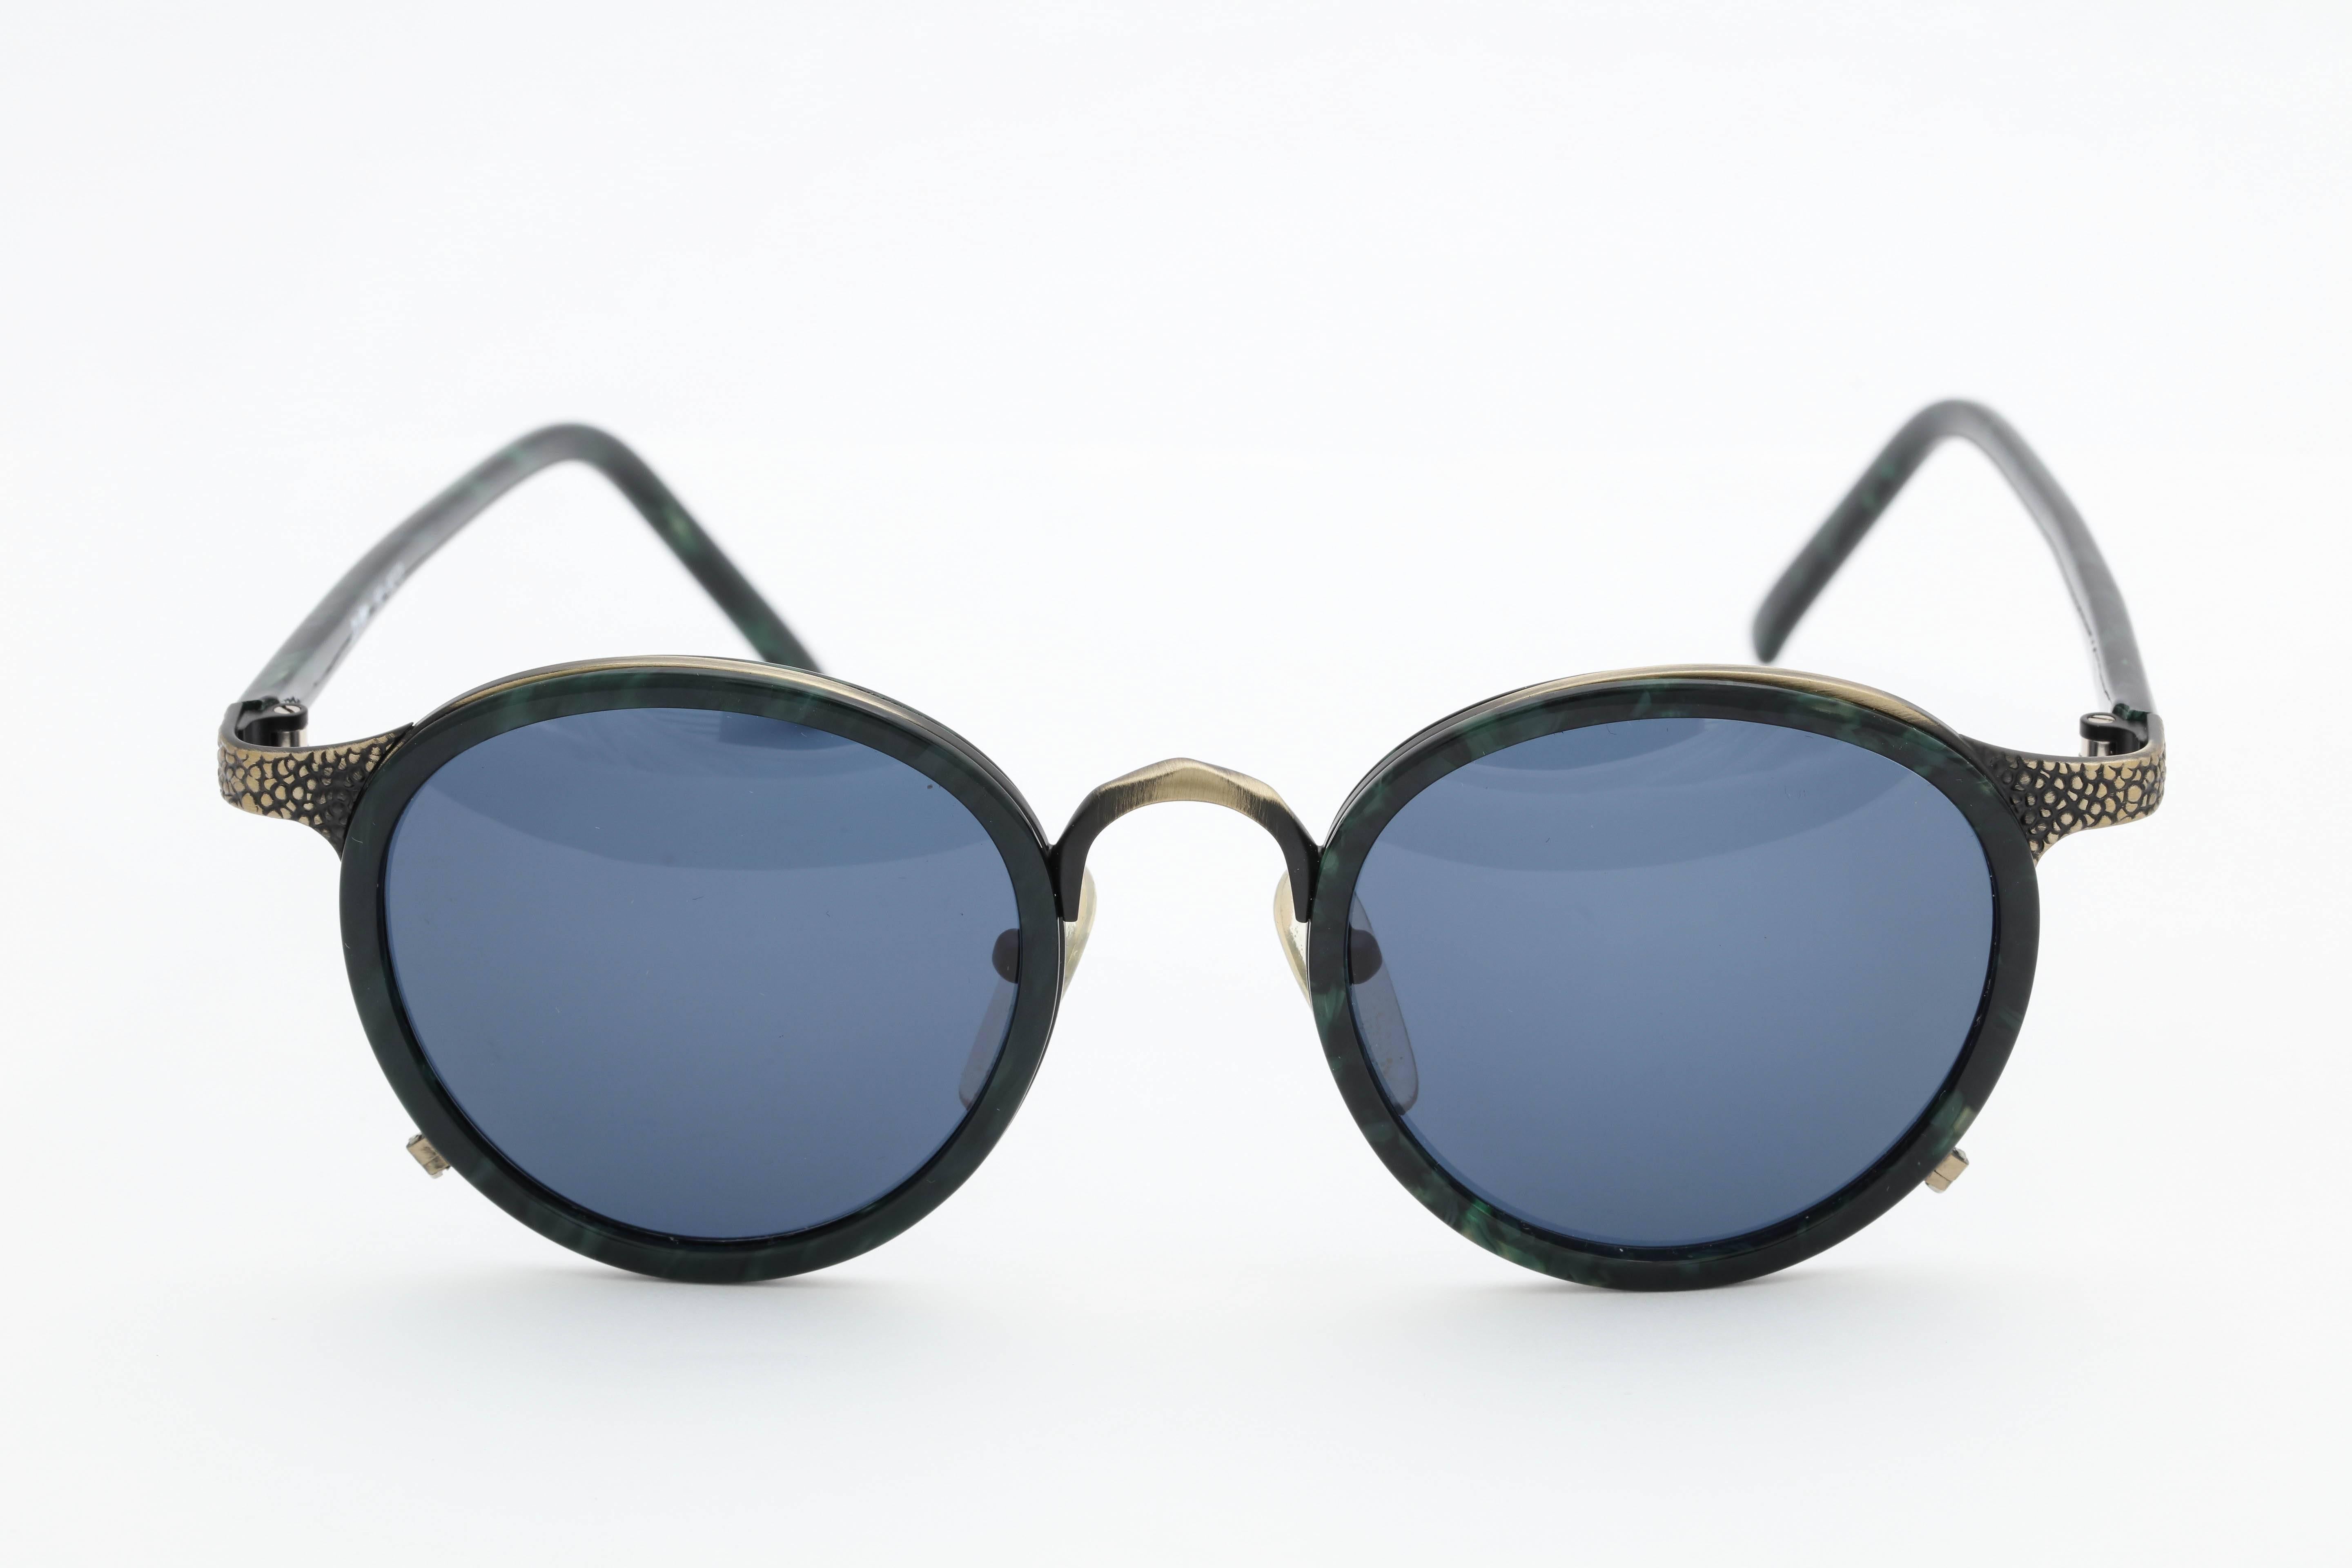 Vintage Jean Paul Gaultier Sunglasses 56-9273 In Excellent Condition For Sale In Chicago, IL